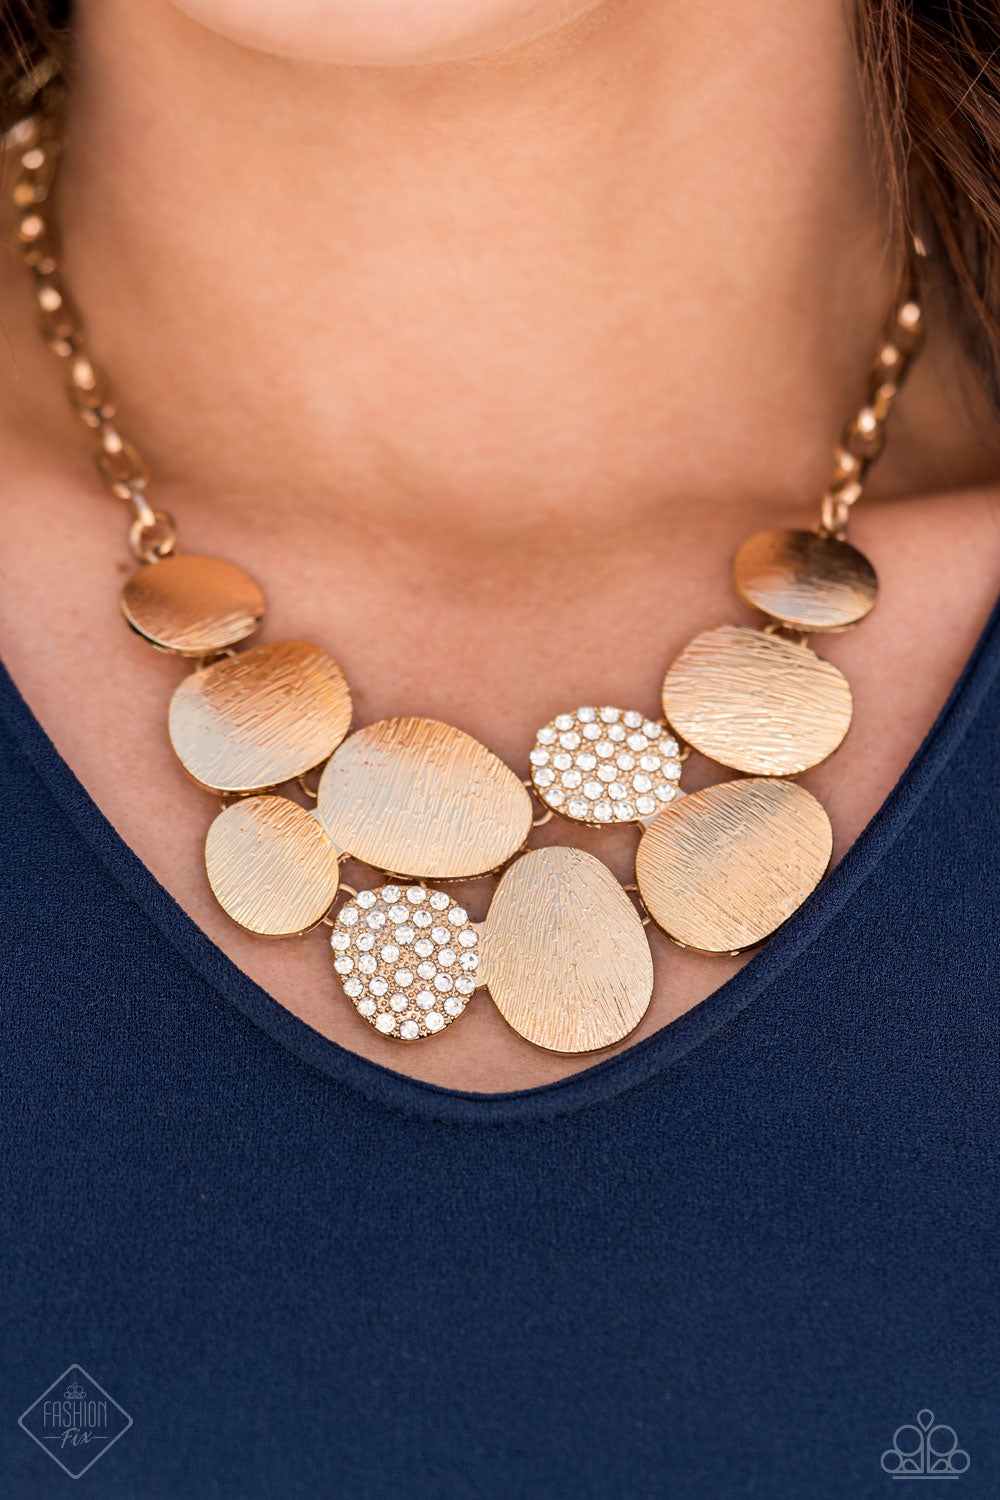 A collection of asymmetrical oval discs connect into a clustered pendant below the collar for a refined flair. Etched linear textures or white rhinestones adorn each disc, offering a gorgeous collision of texture, sheen, and sparkle. Features an adjustable clasp closure. Includes one pair of matching earrings.